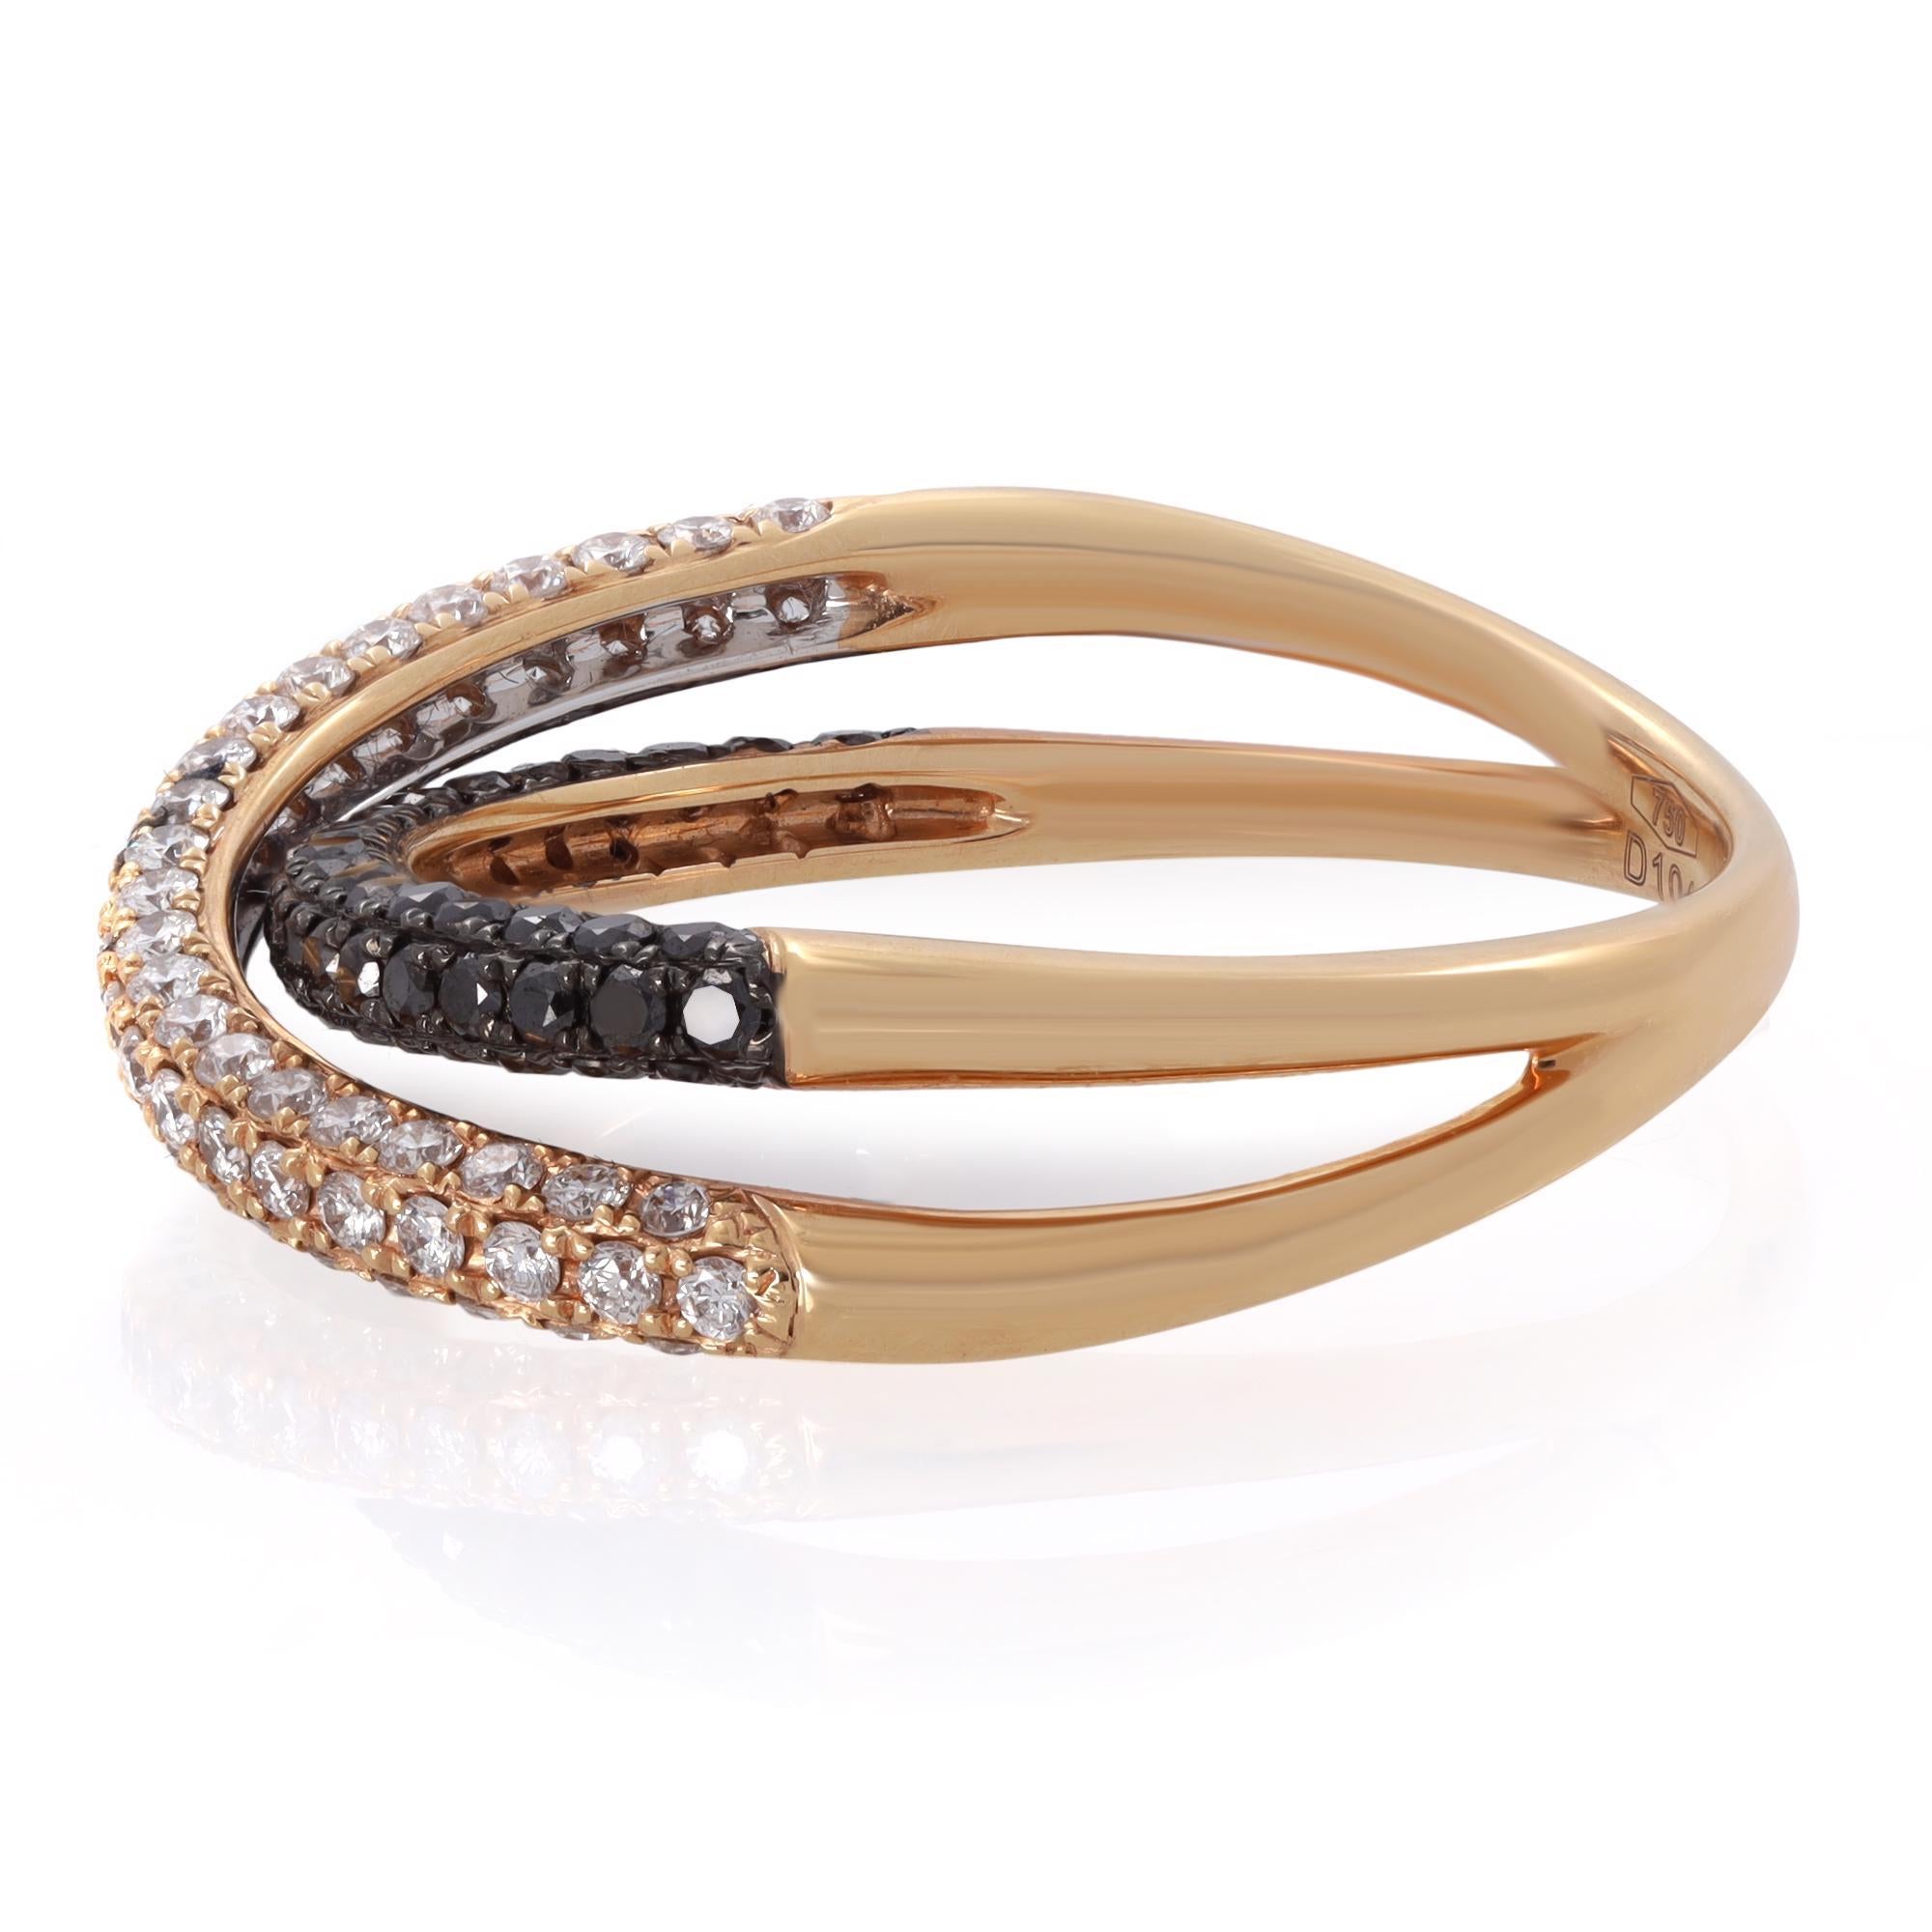 Piero Milano White & Black Diamond Crossover Ring 18k Rose Gold 1.04cttw In New Condition For Sale In New York, NY